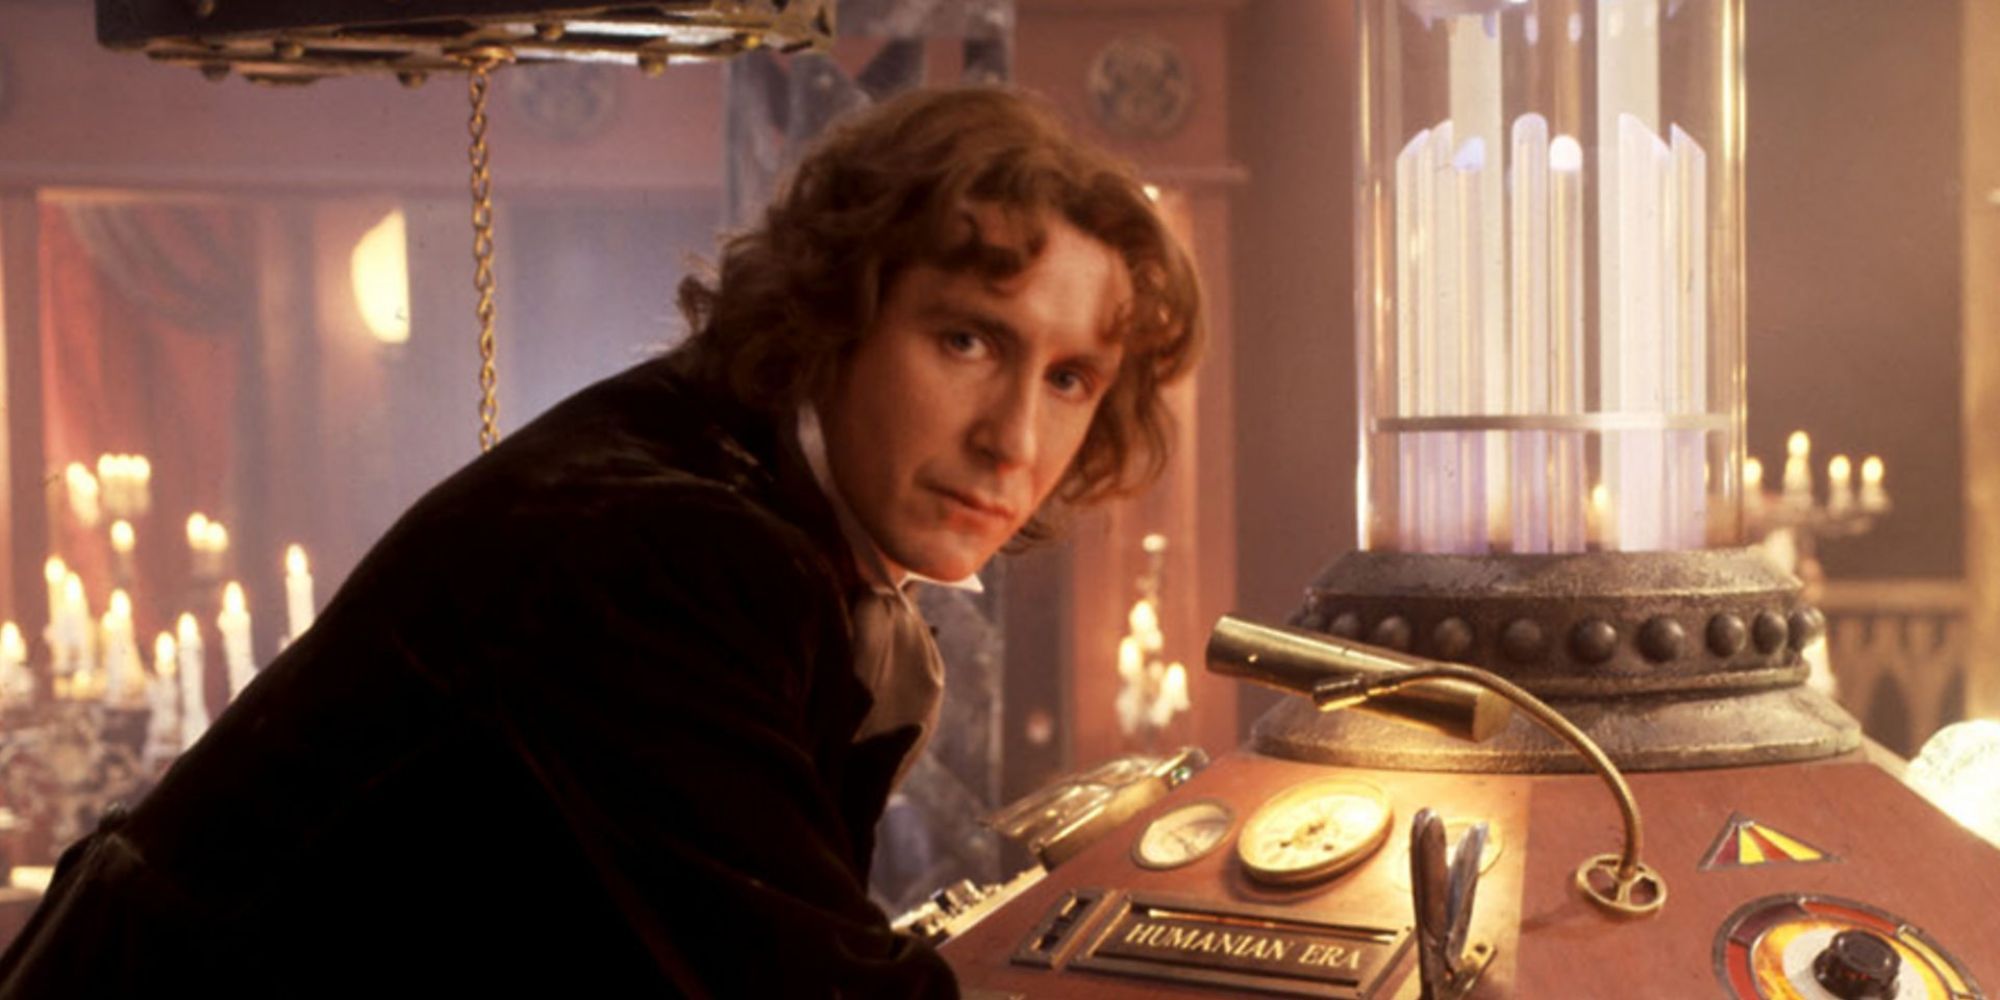 8th Doctor leaning against his TARDIS console